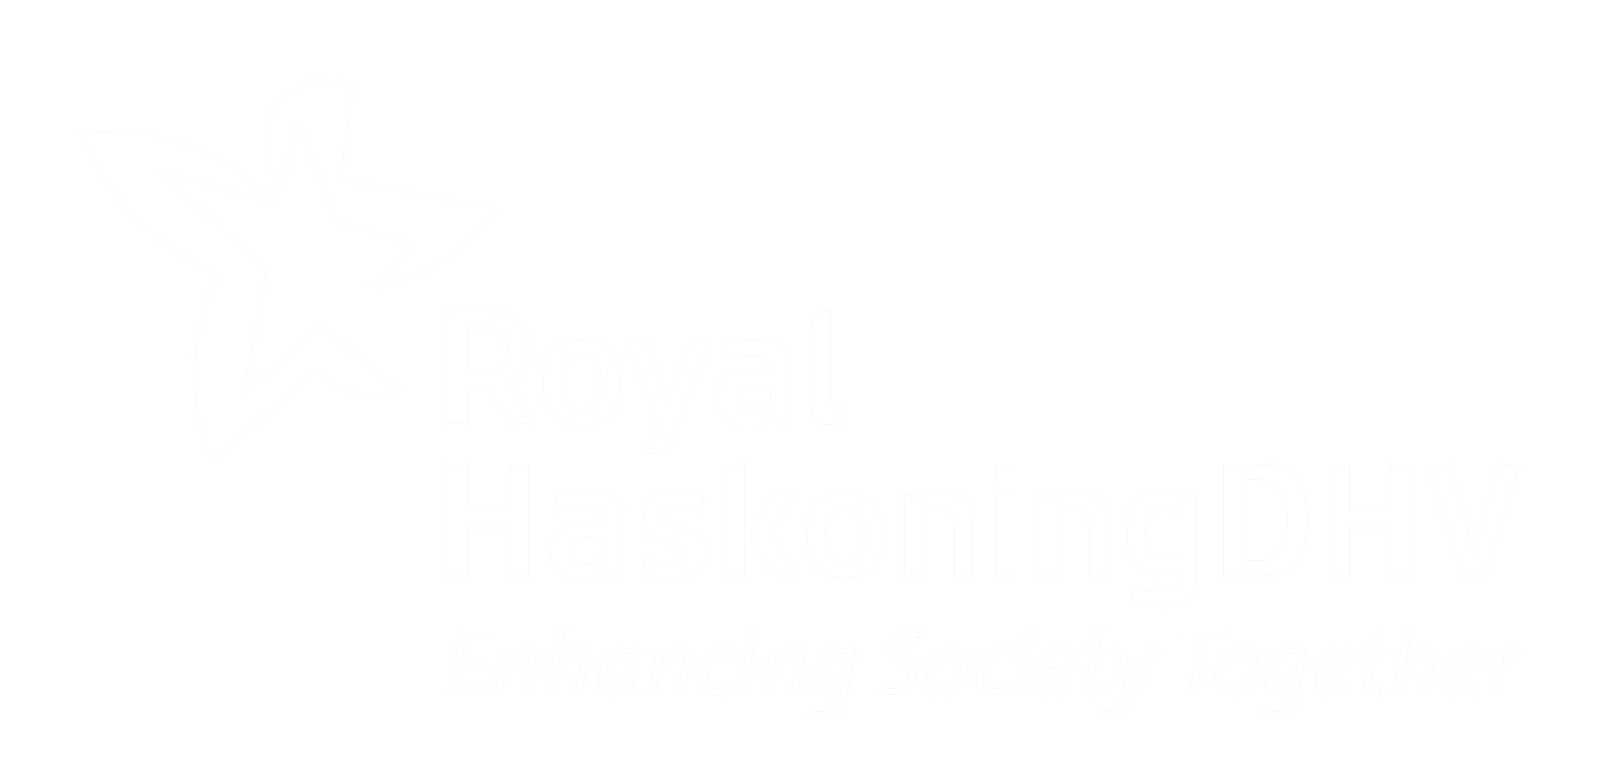 View this to see the Royal HaskoningDHV company website